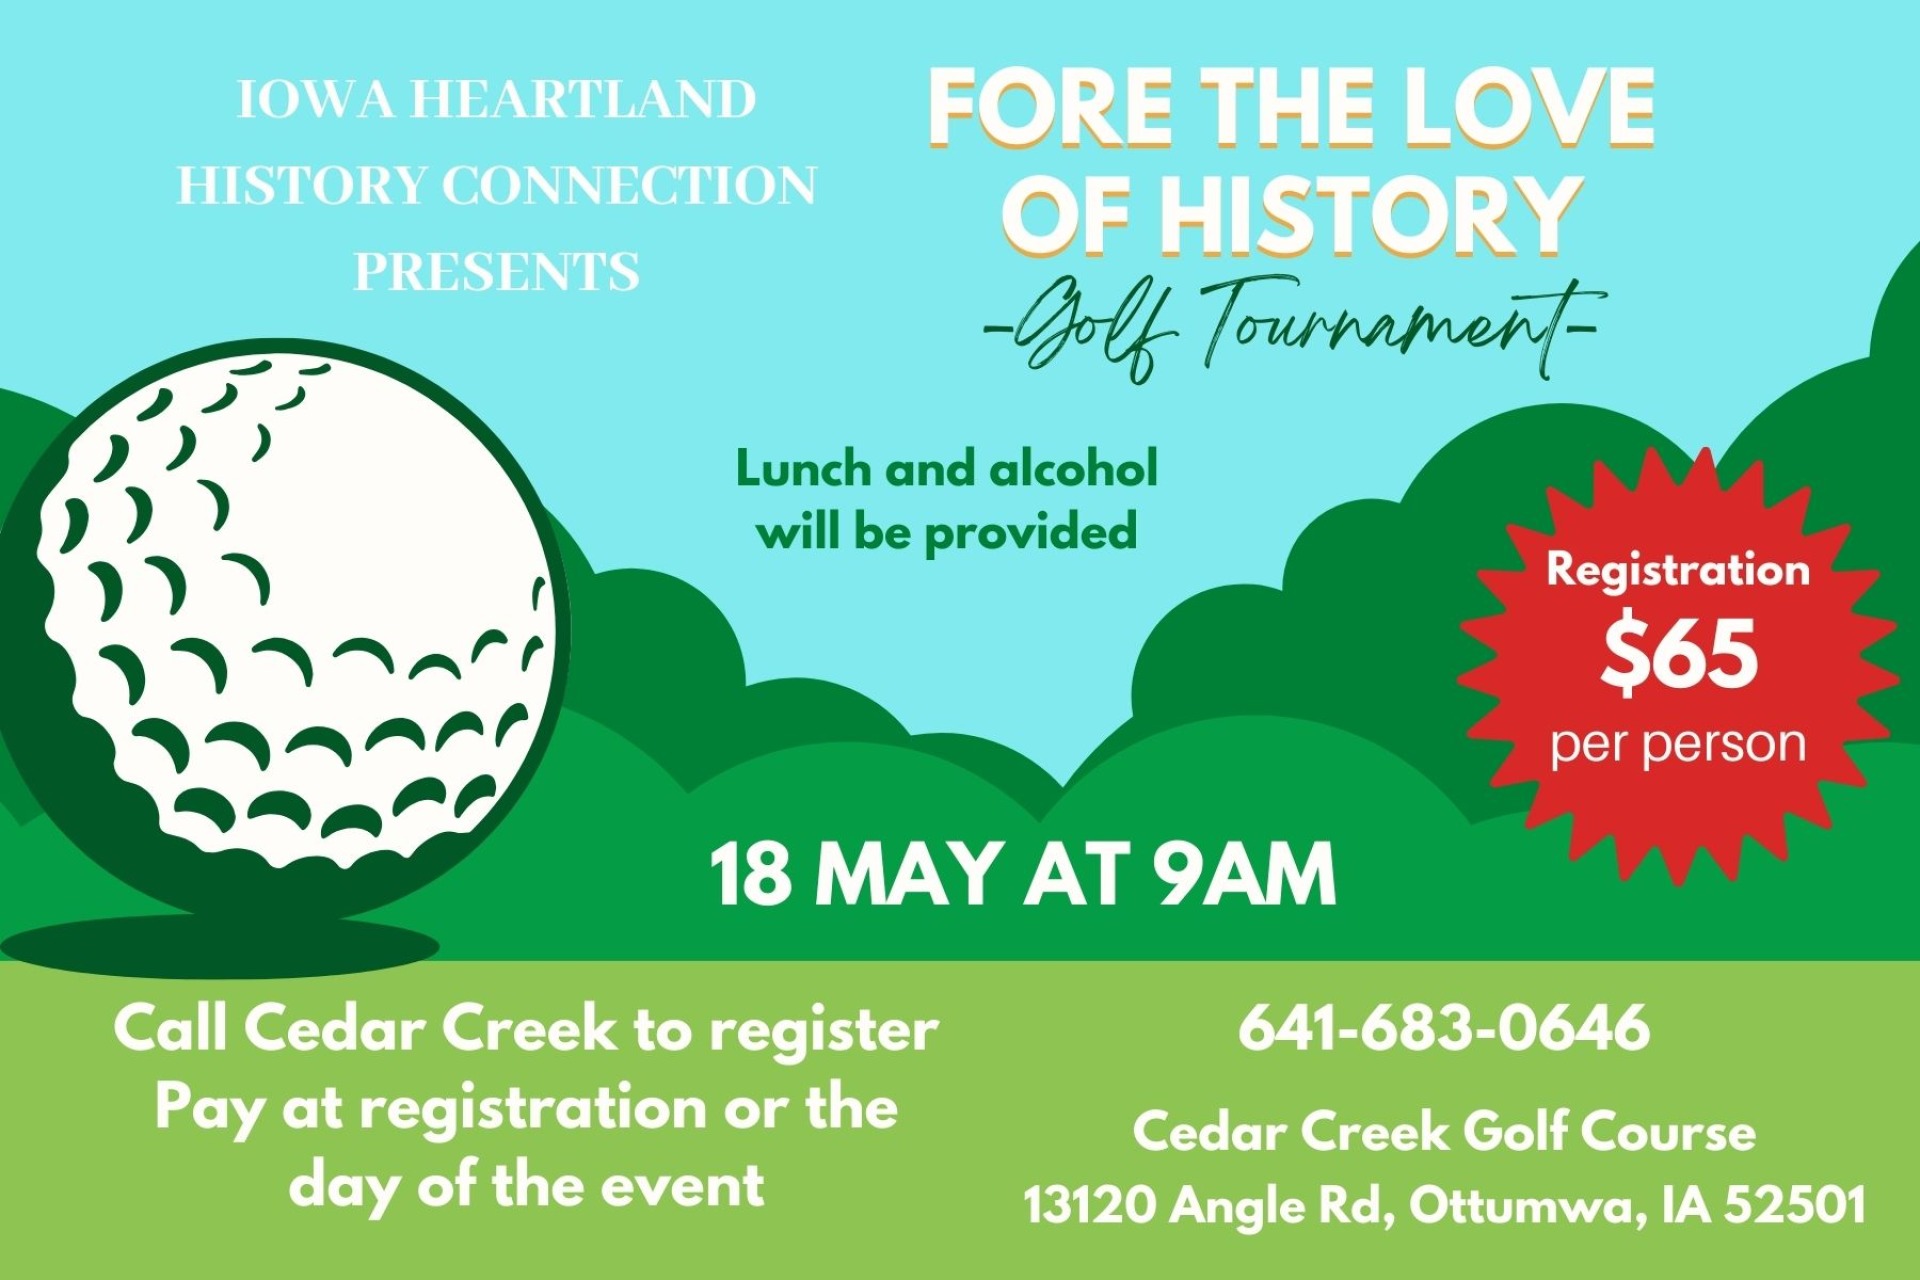 Fore the Love of History Golf Tournament Fundraiser